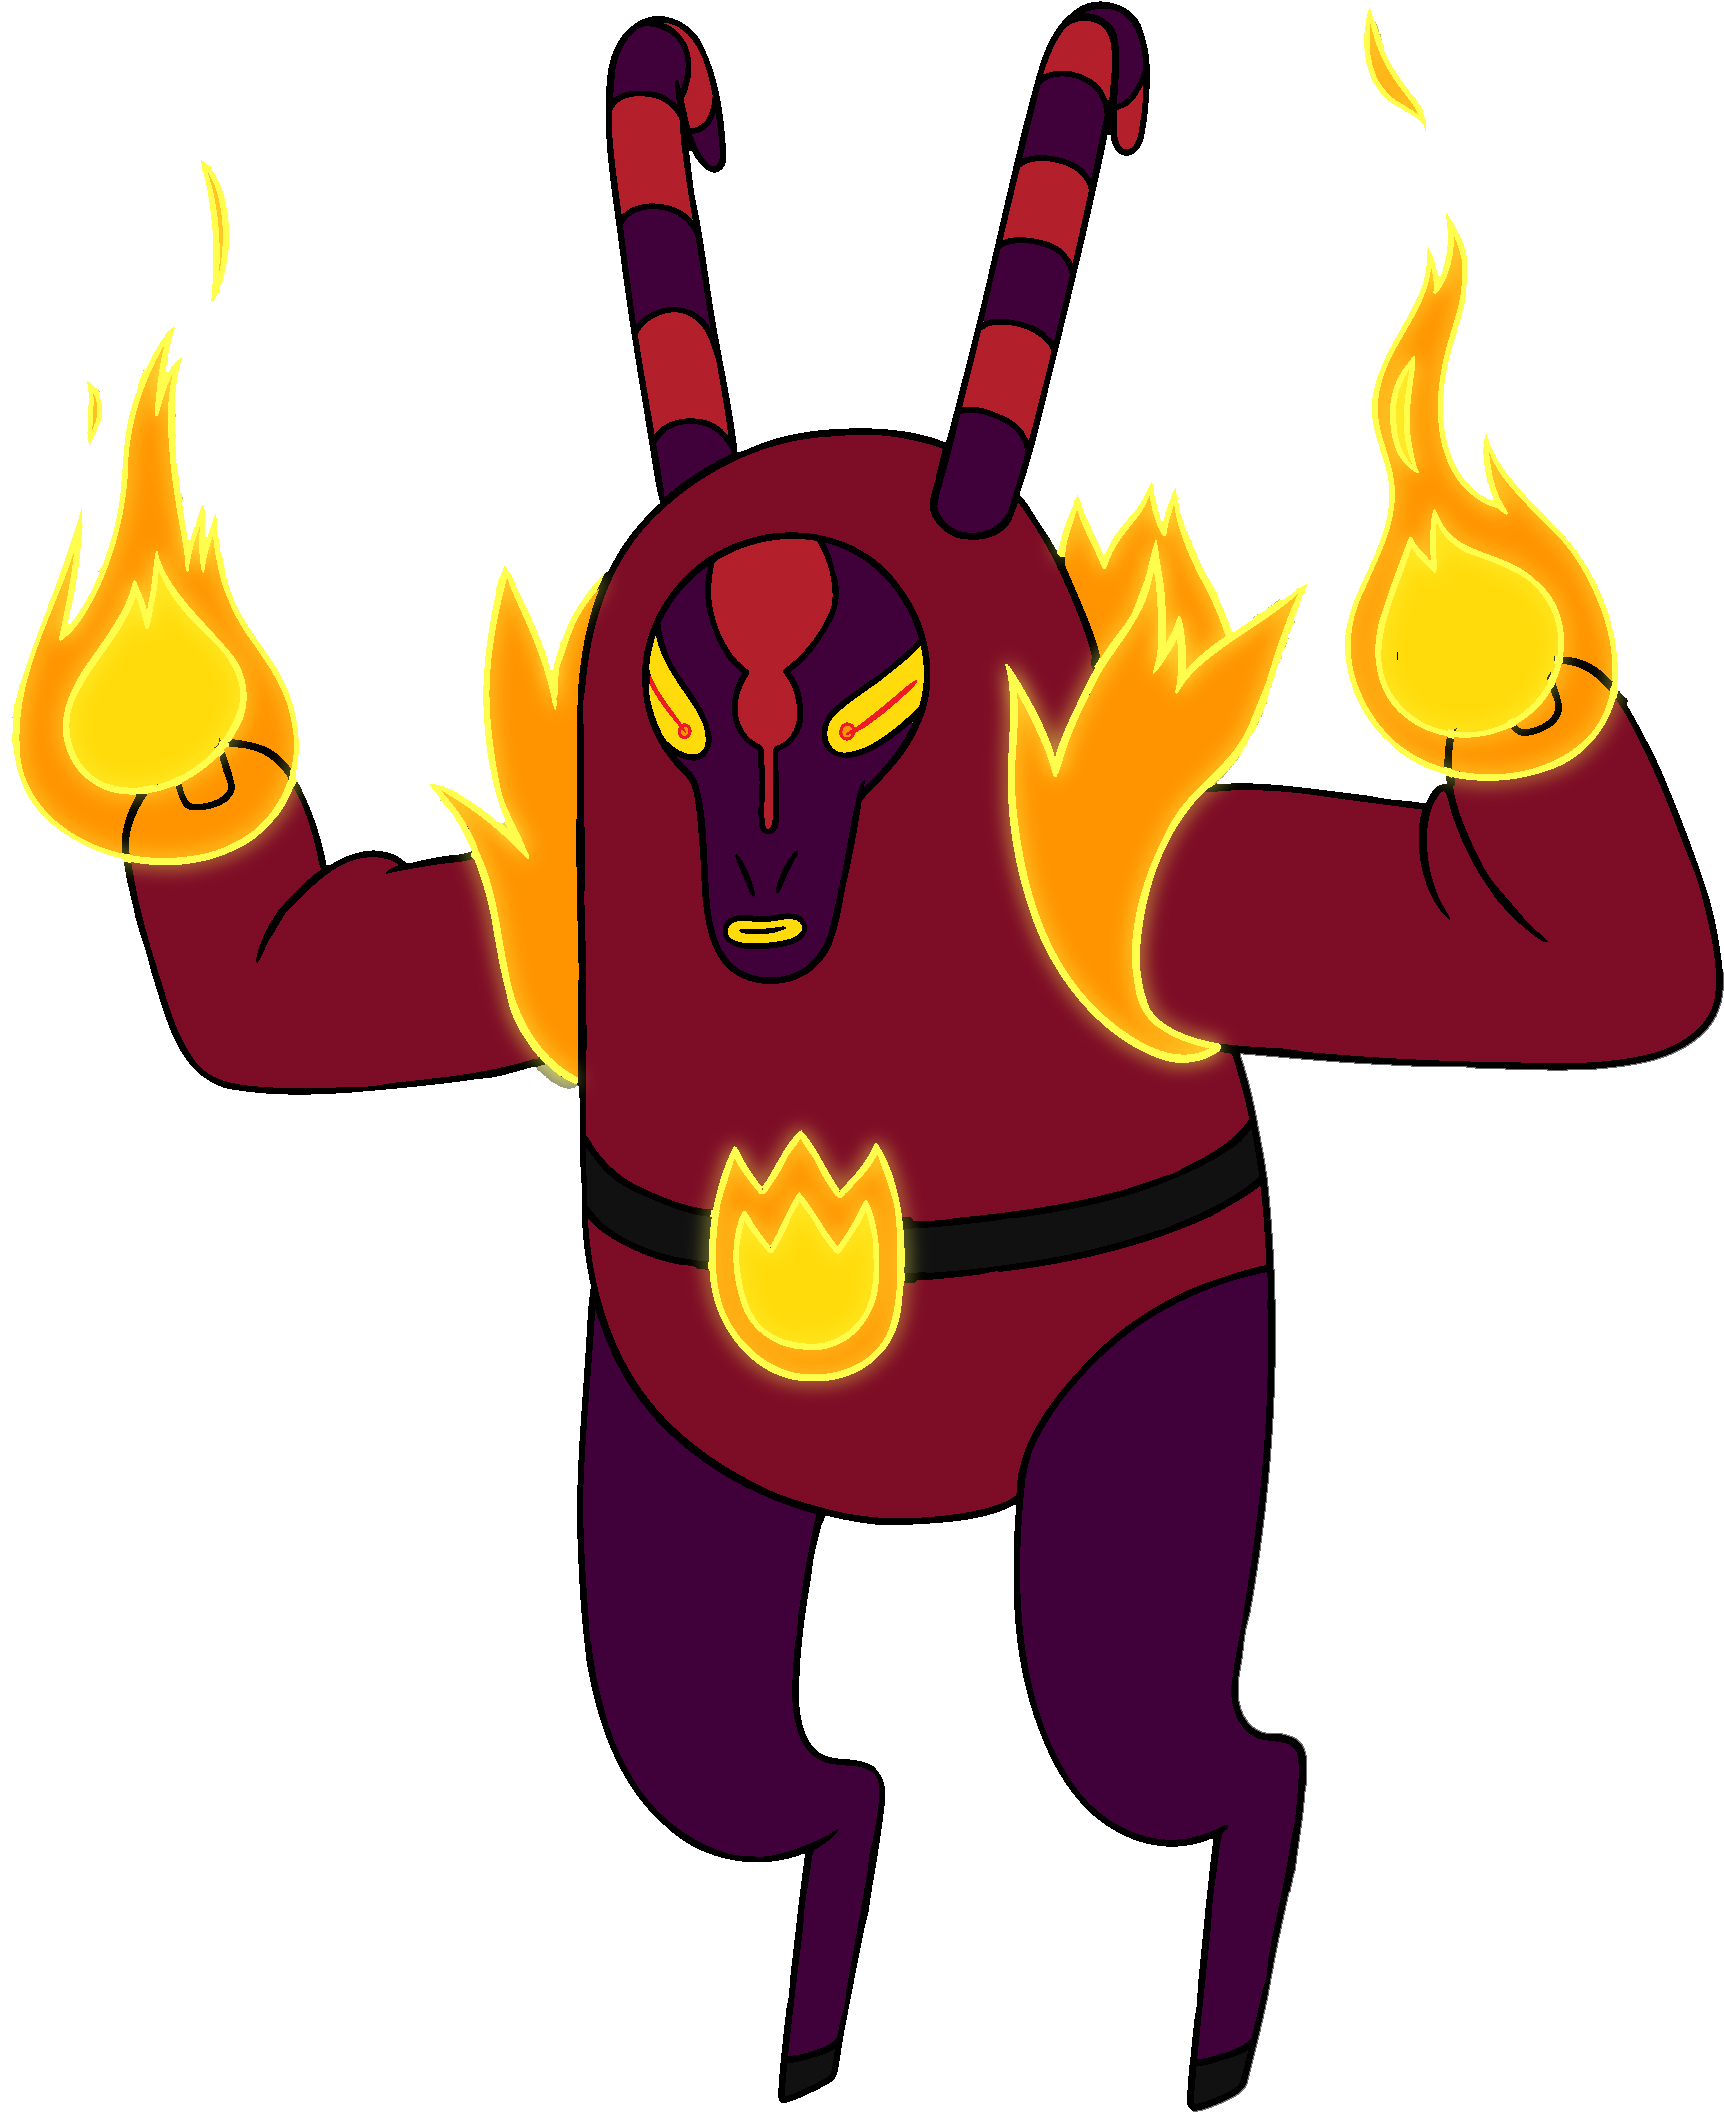 Flames clipart comic. Flame lord adventure time